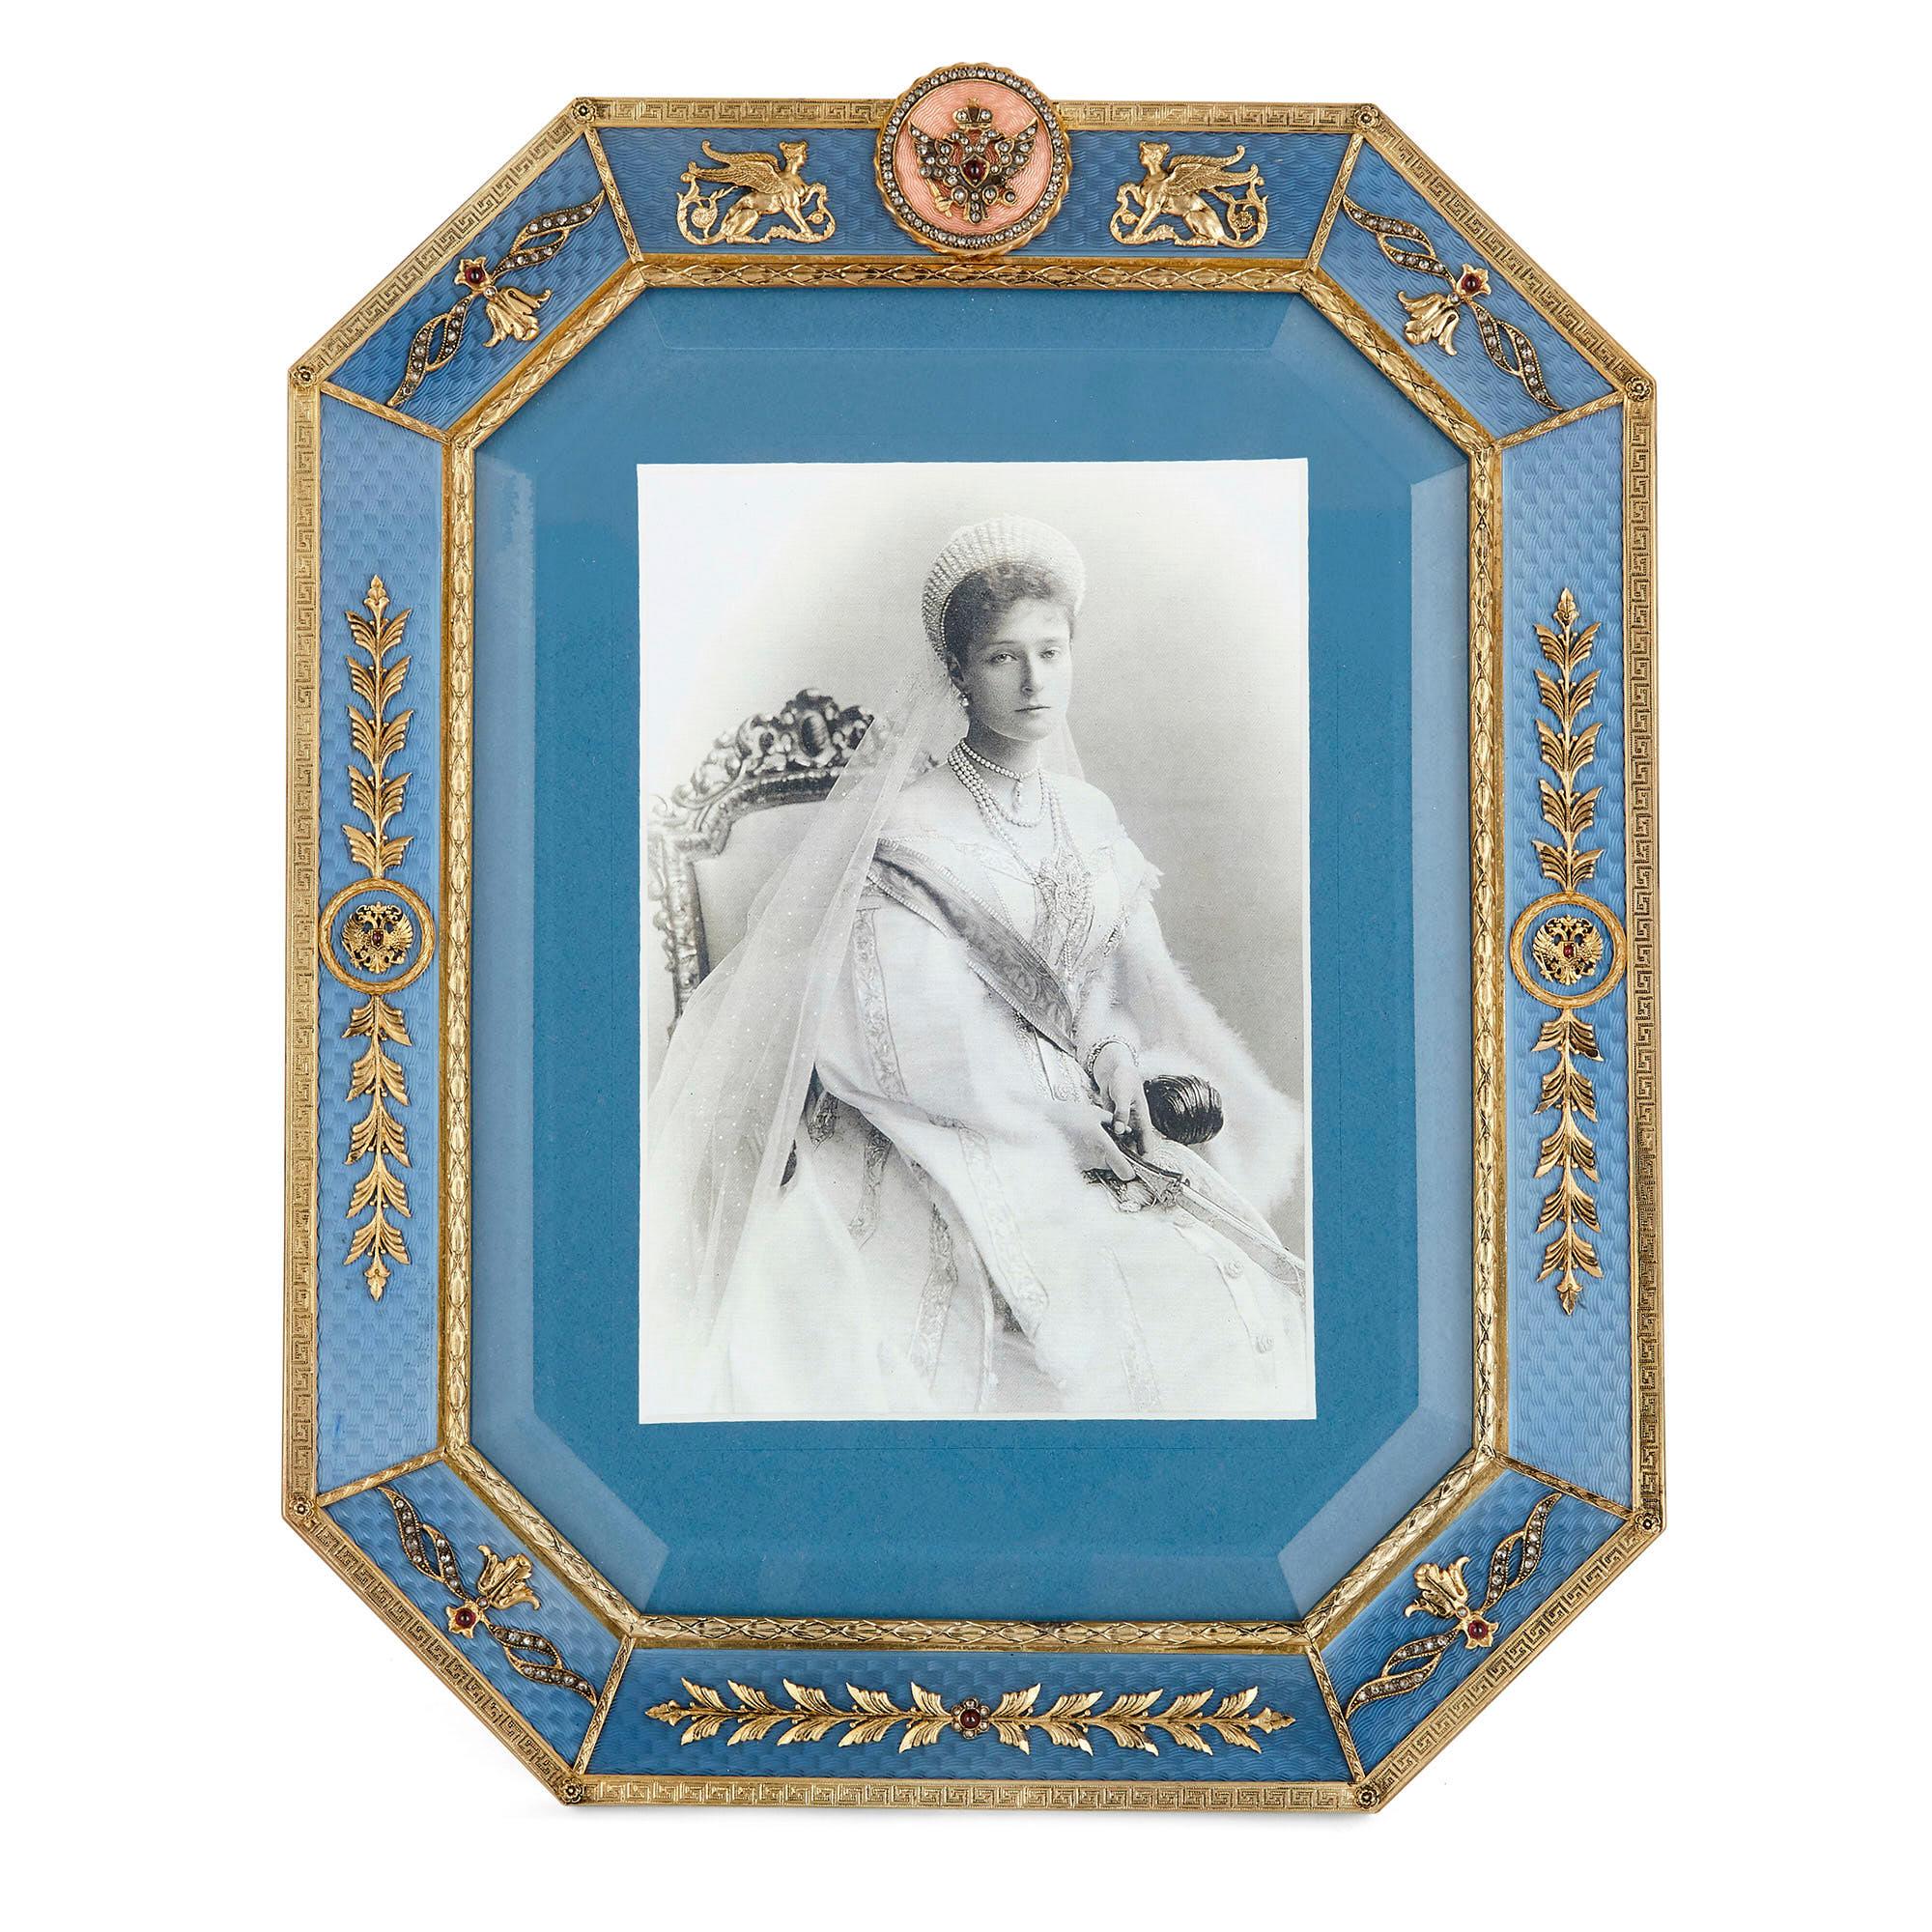 This picture frame is designed in the style of Fabergé. The frame is rectangular in profile with chamfered corners. The surface of the frame is profusely ornamented with guilloché enamel in a bright blue, the interior and exterior edge of the enamel